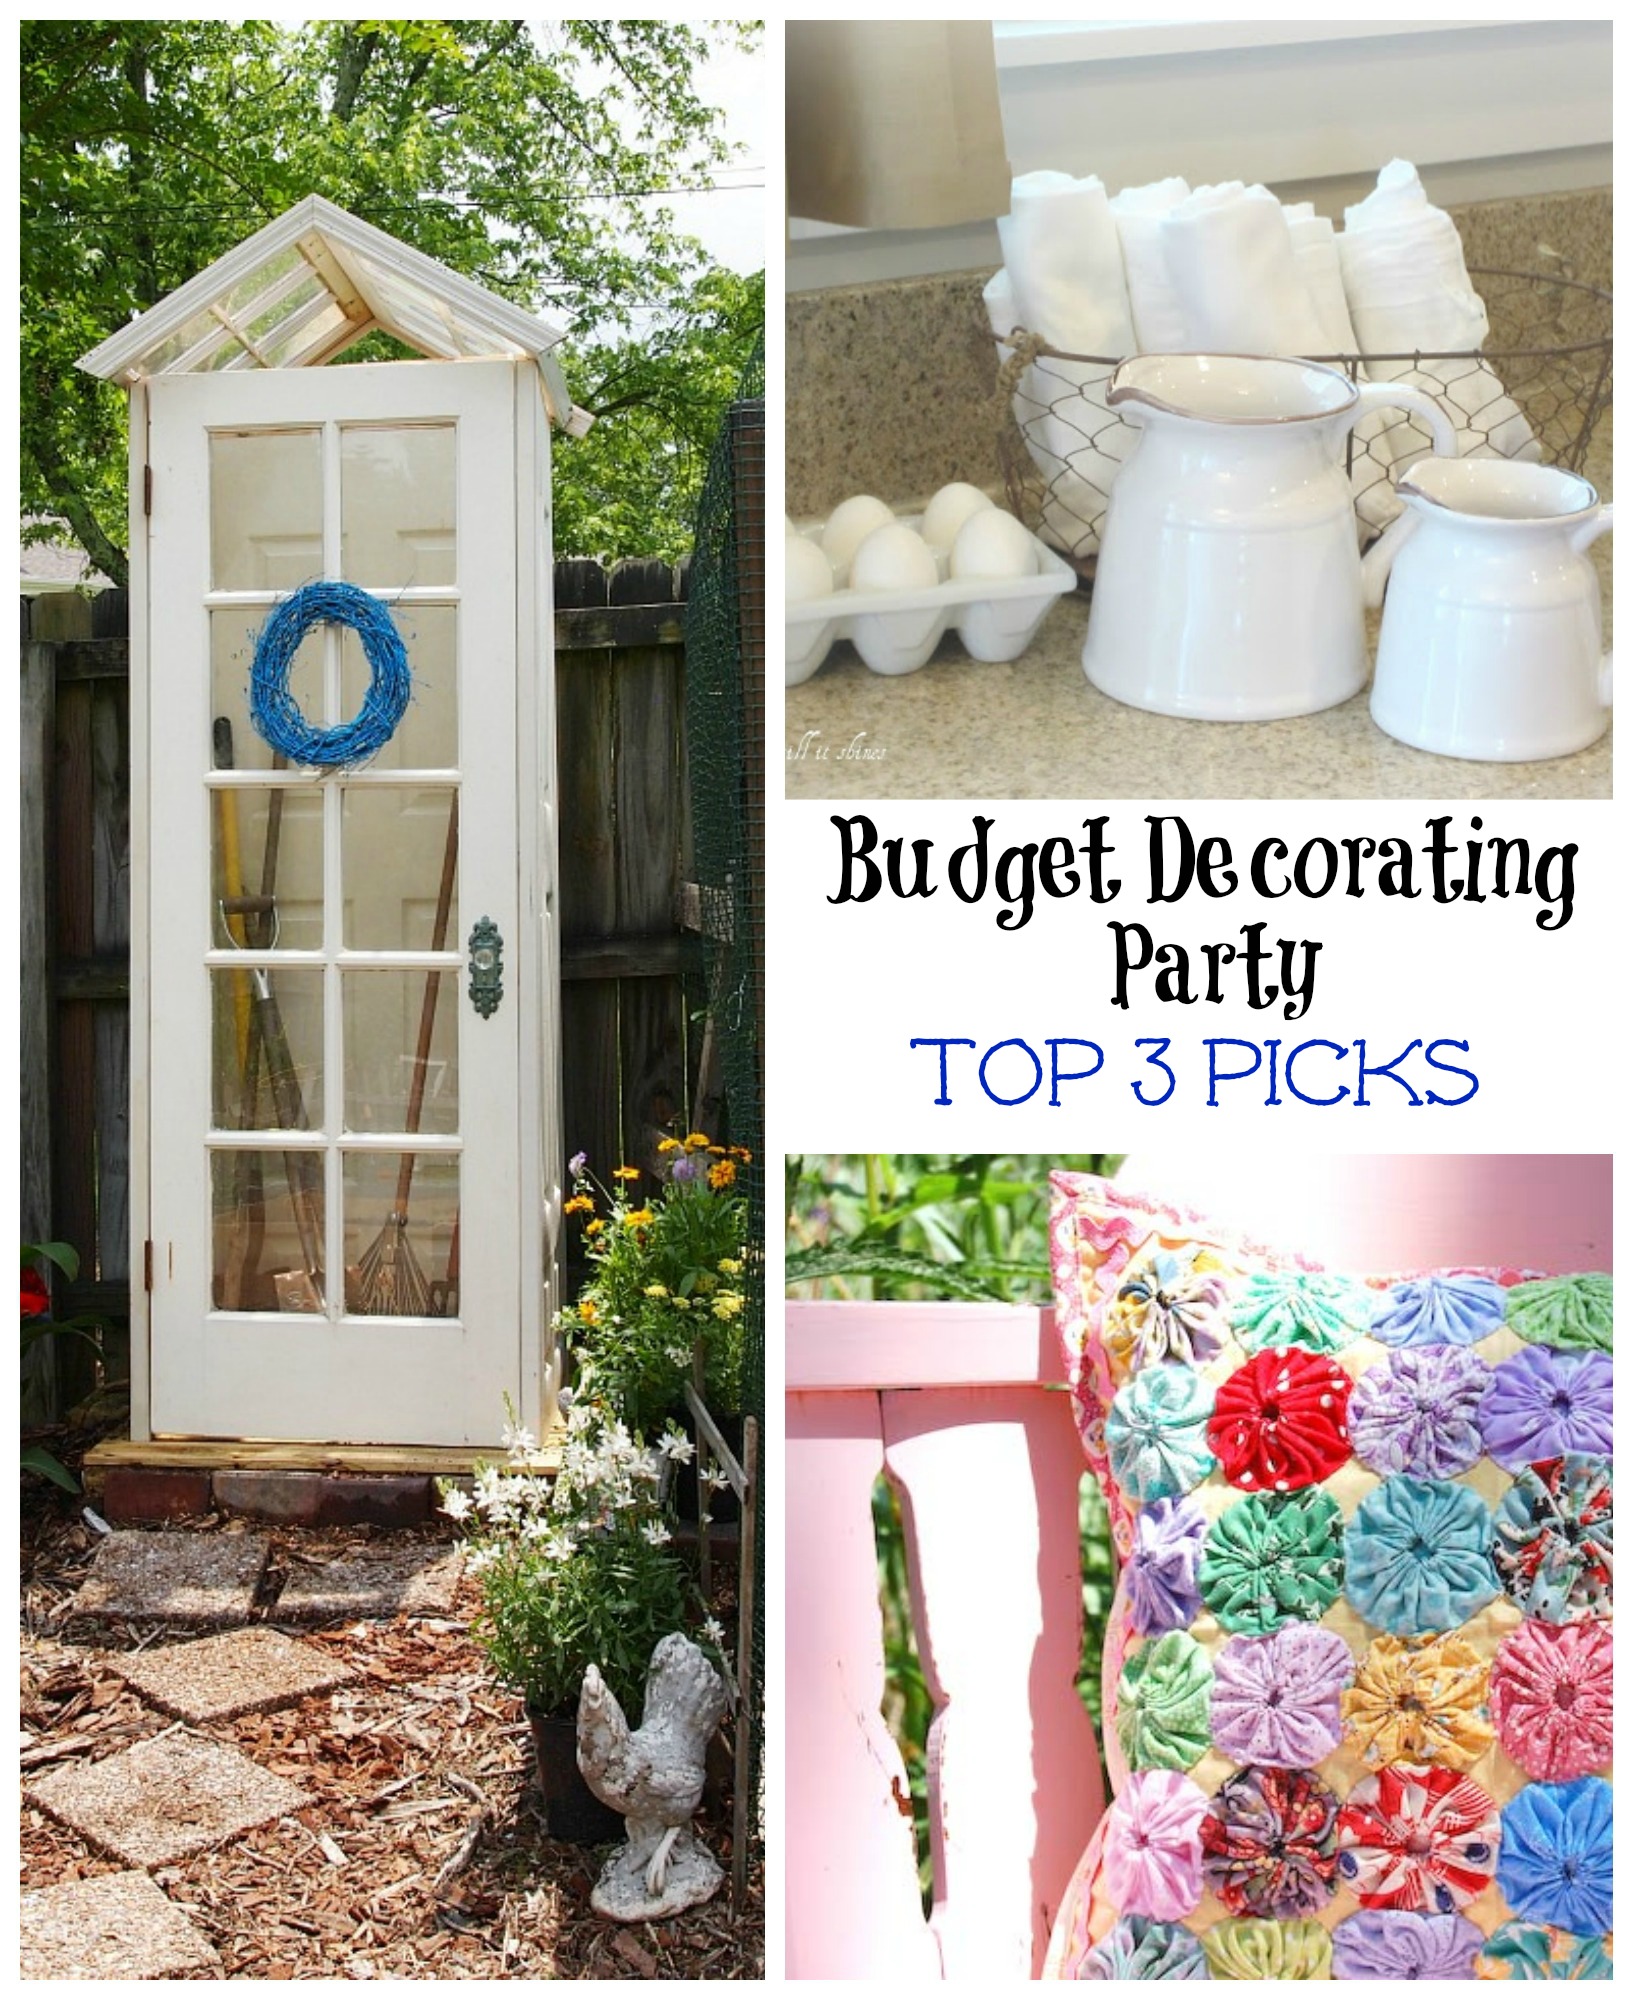 Budget Decorating Party